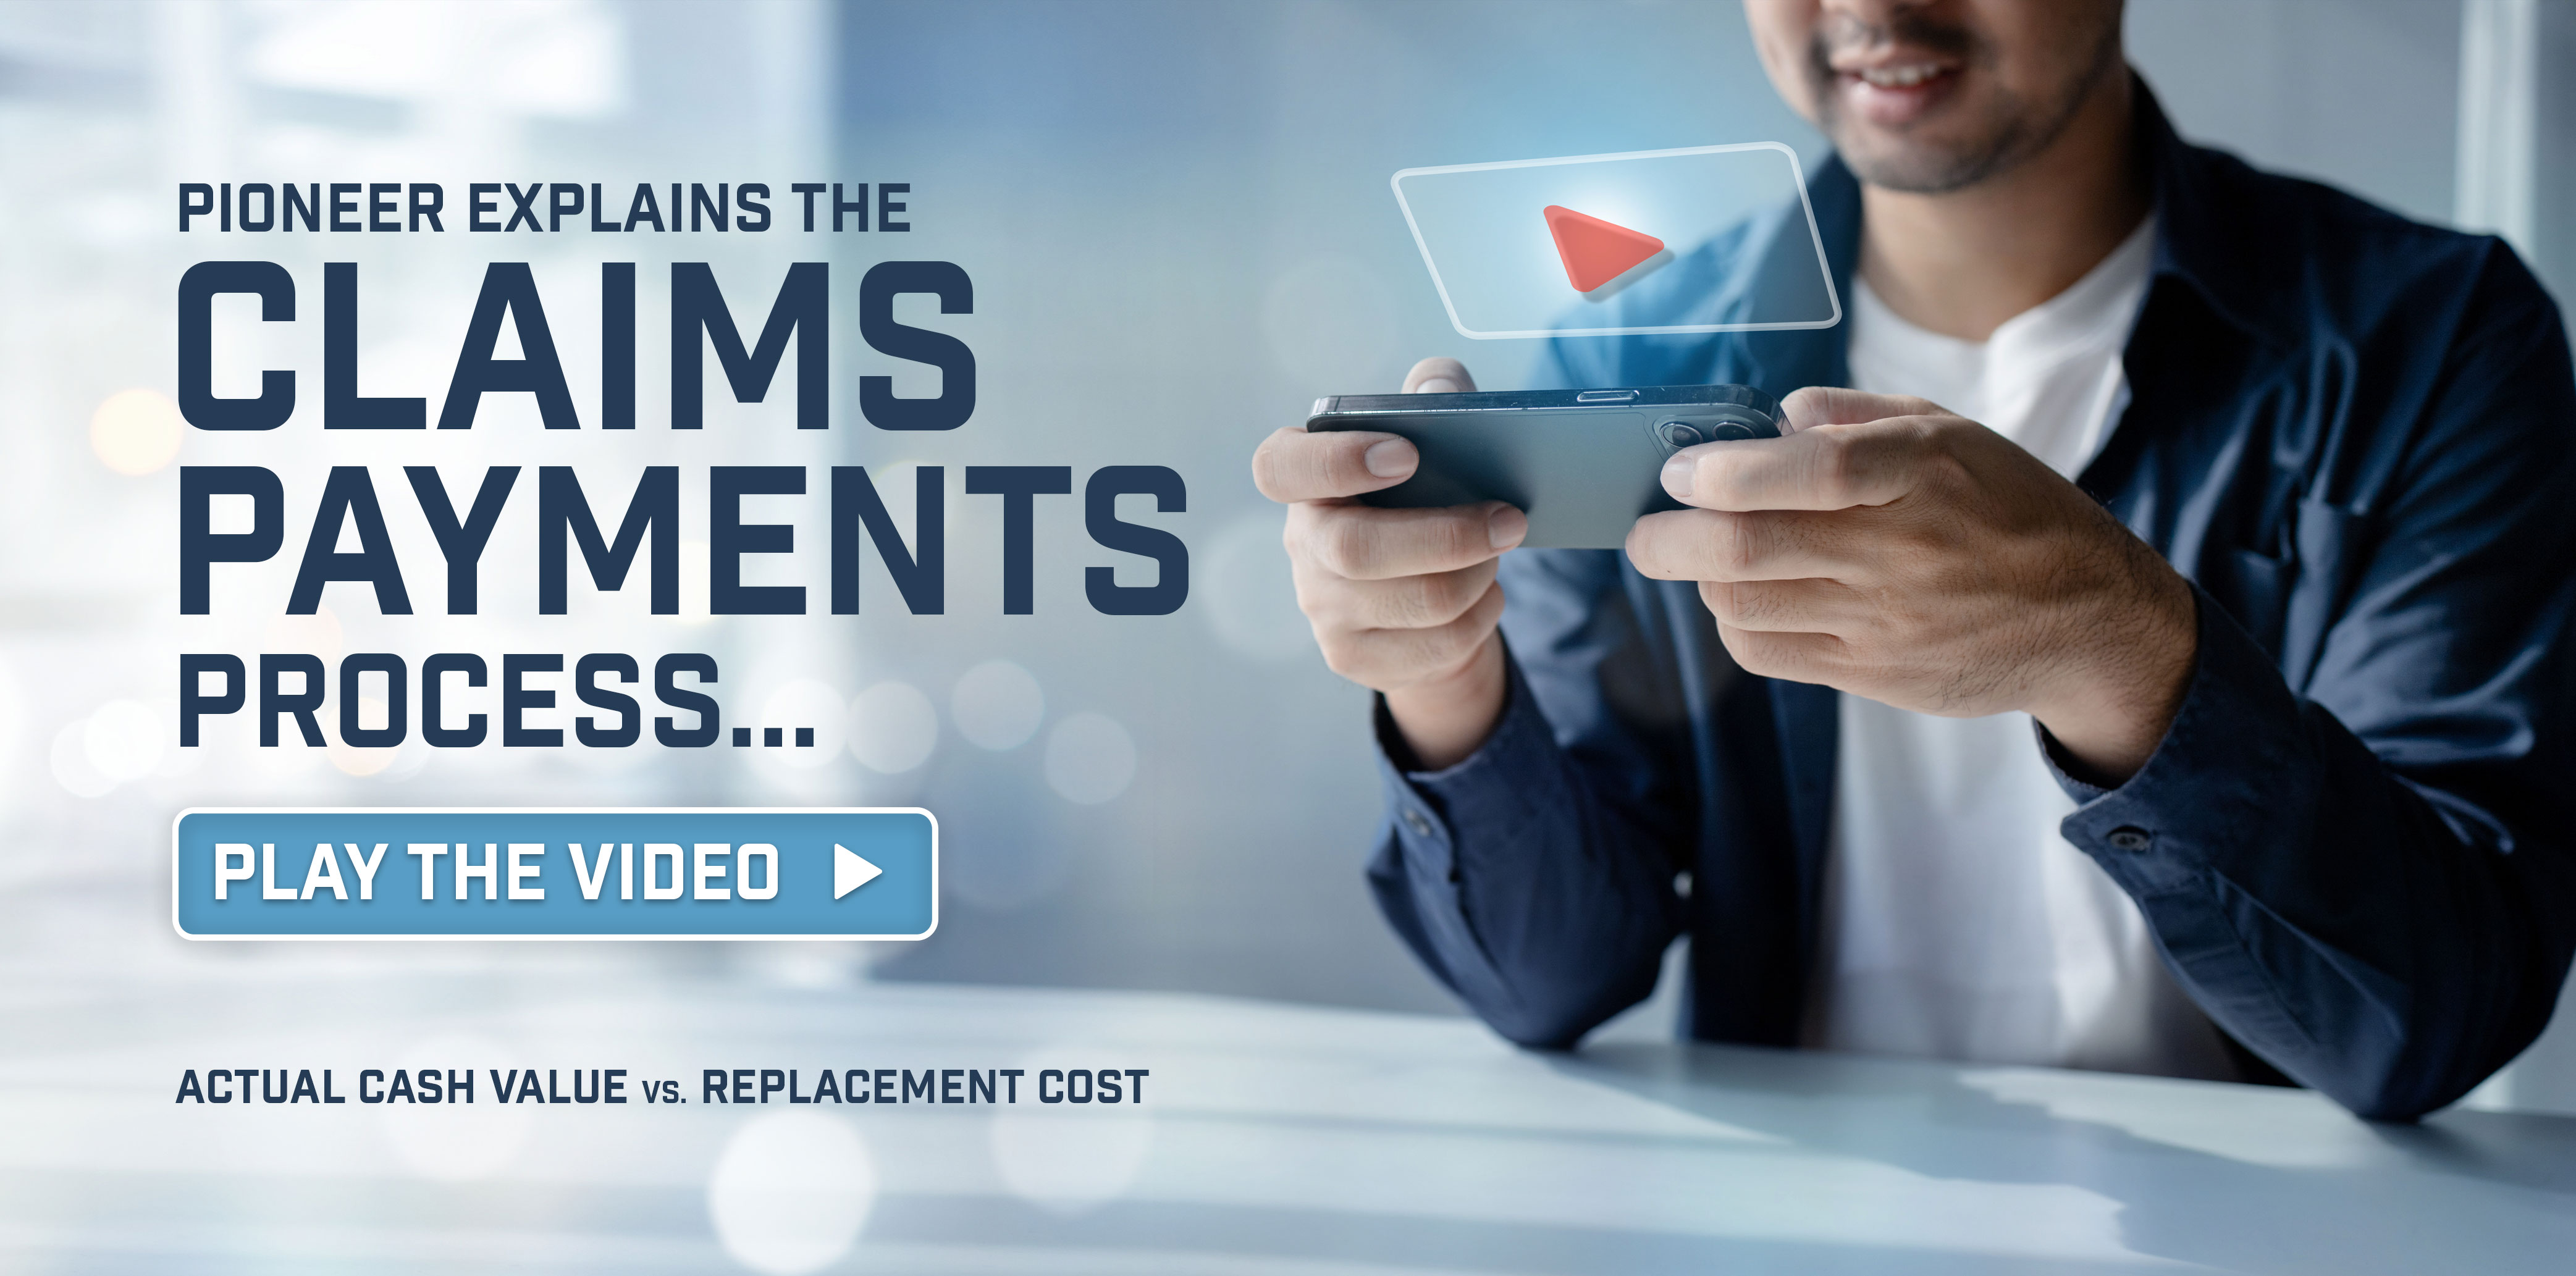 Watch a video on the difference between actual cash value and replacement cost for homeowners claims.